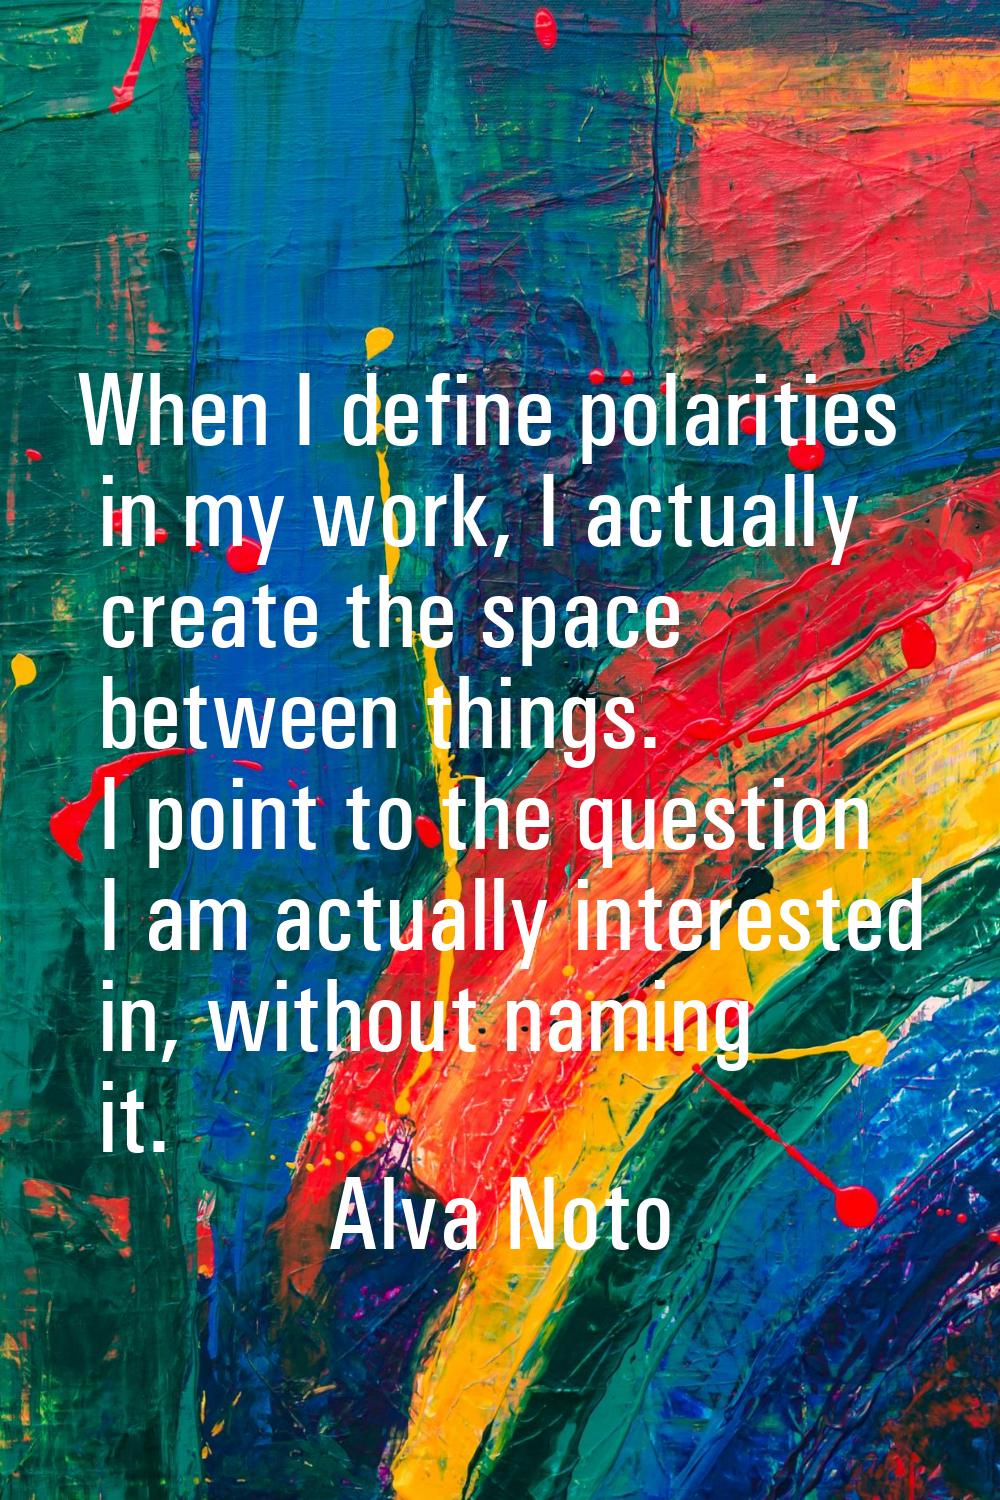 When I define polarities in my work, I actually create the space between things. I point to the que